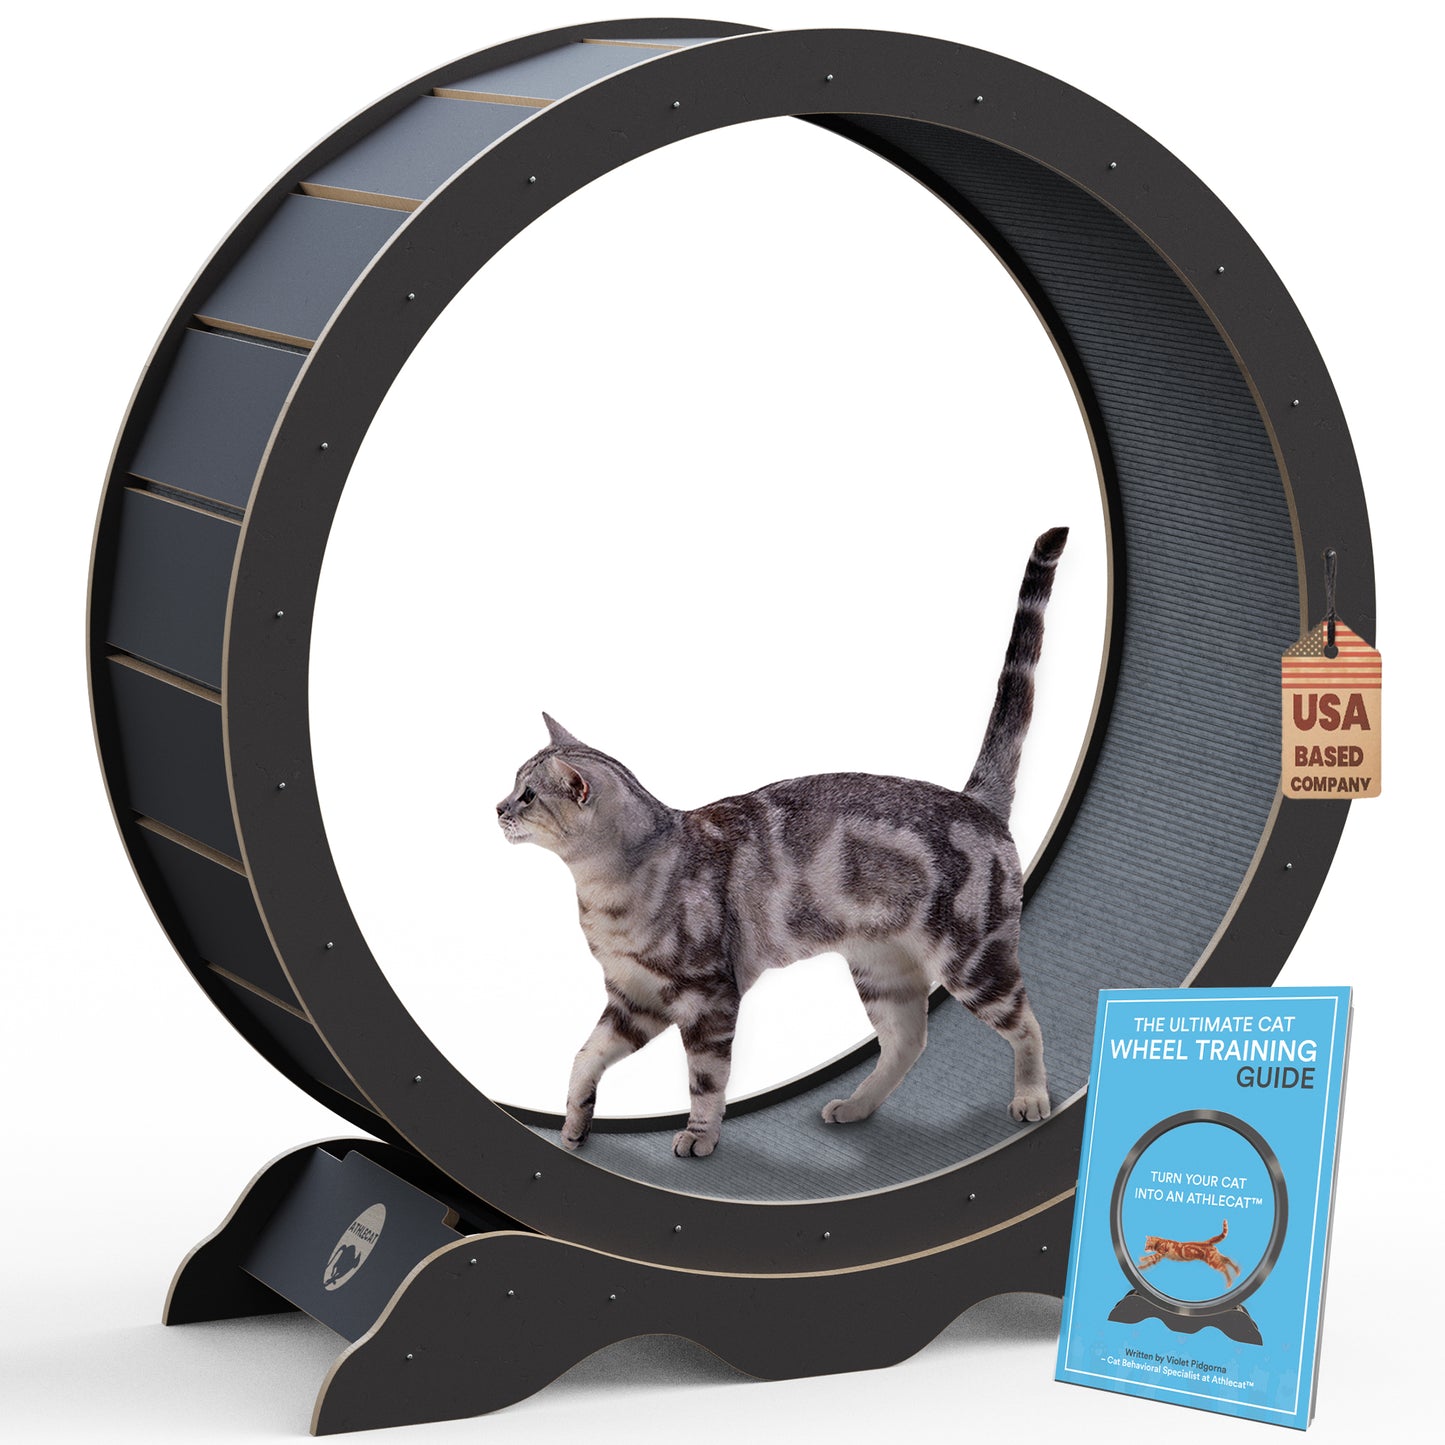 Cat exercise wheel made of black with training guide 